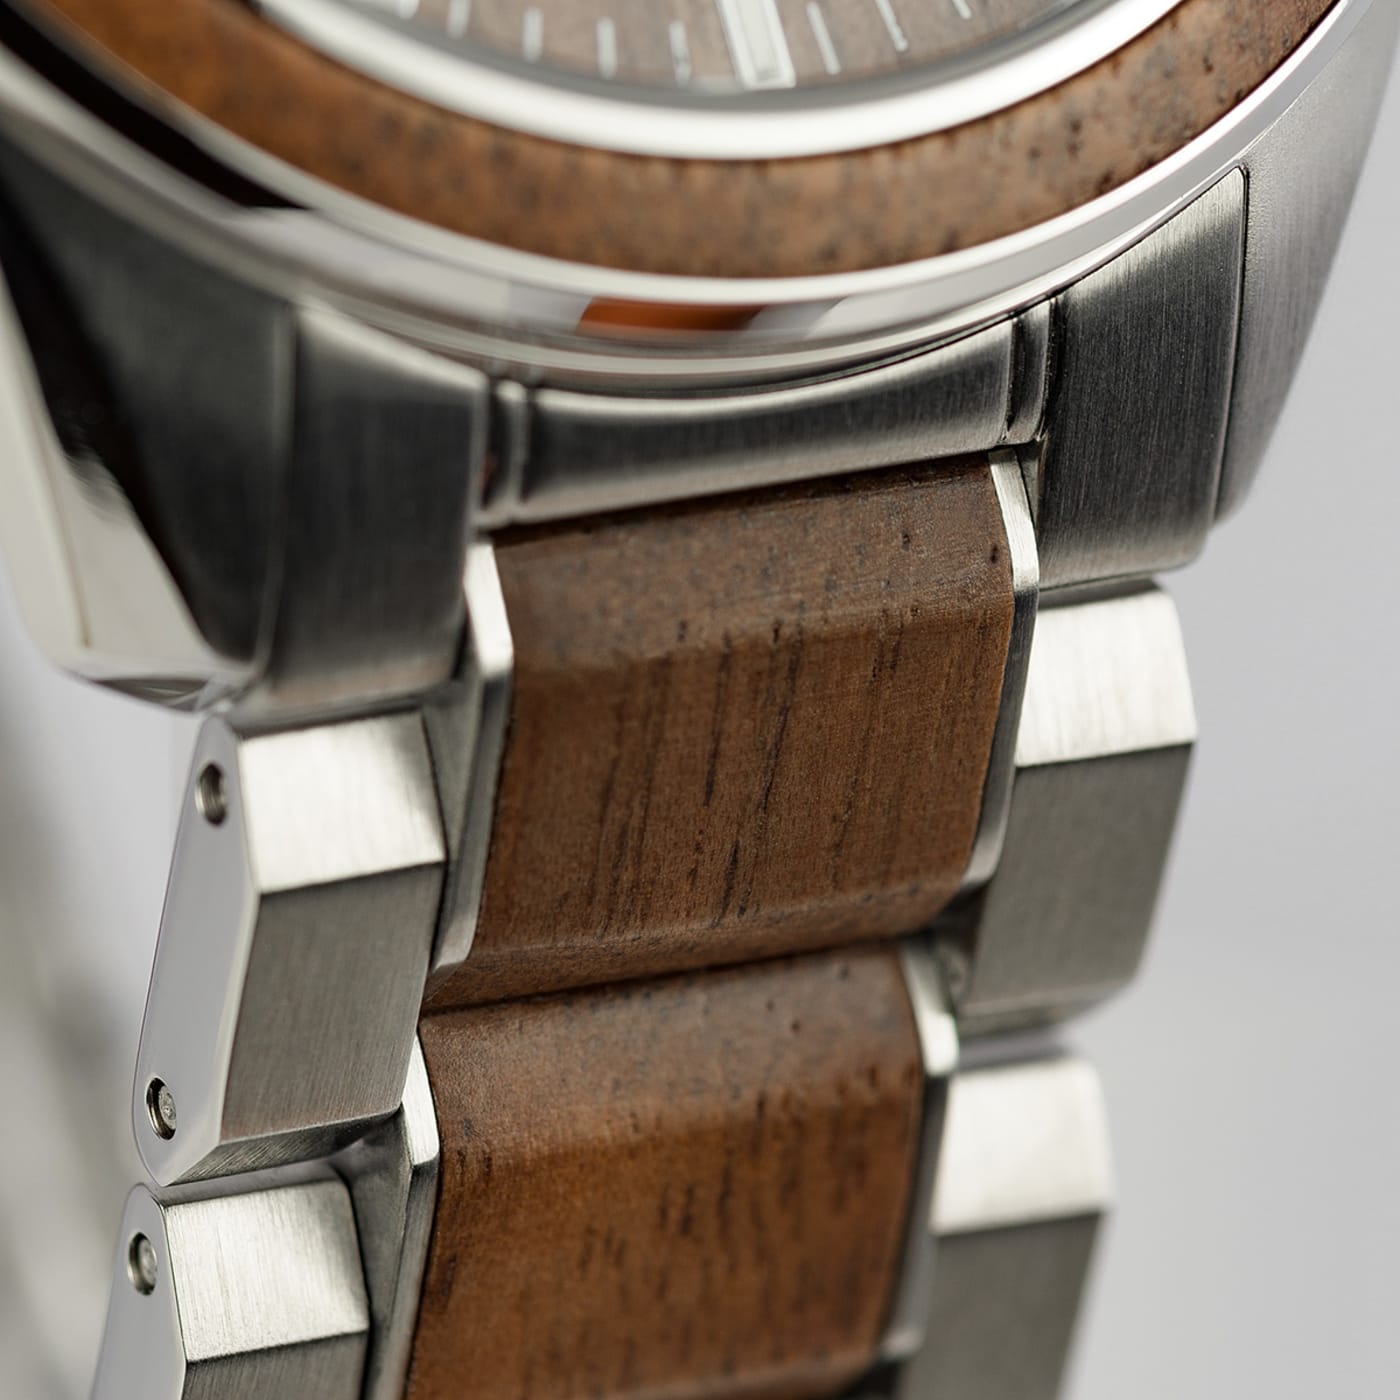 JACQUES LEMANS Eco Power Men's Watch with Solid Stainless Steel / Wood  Inlay Strap 1-2116 - 1DG30A